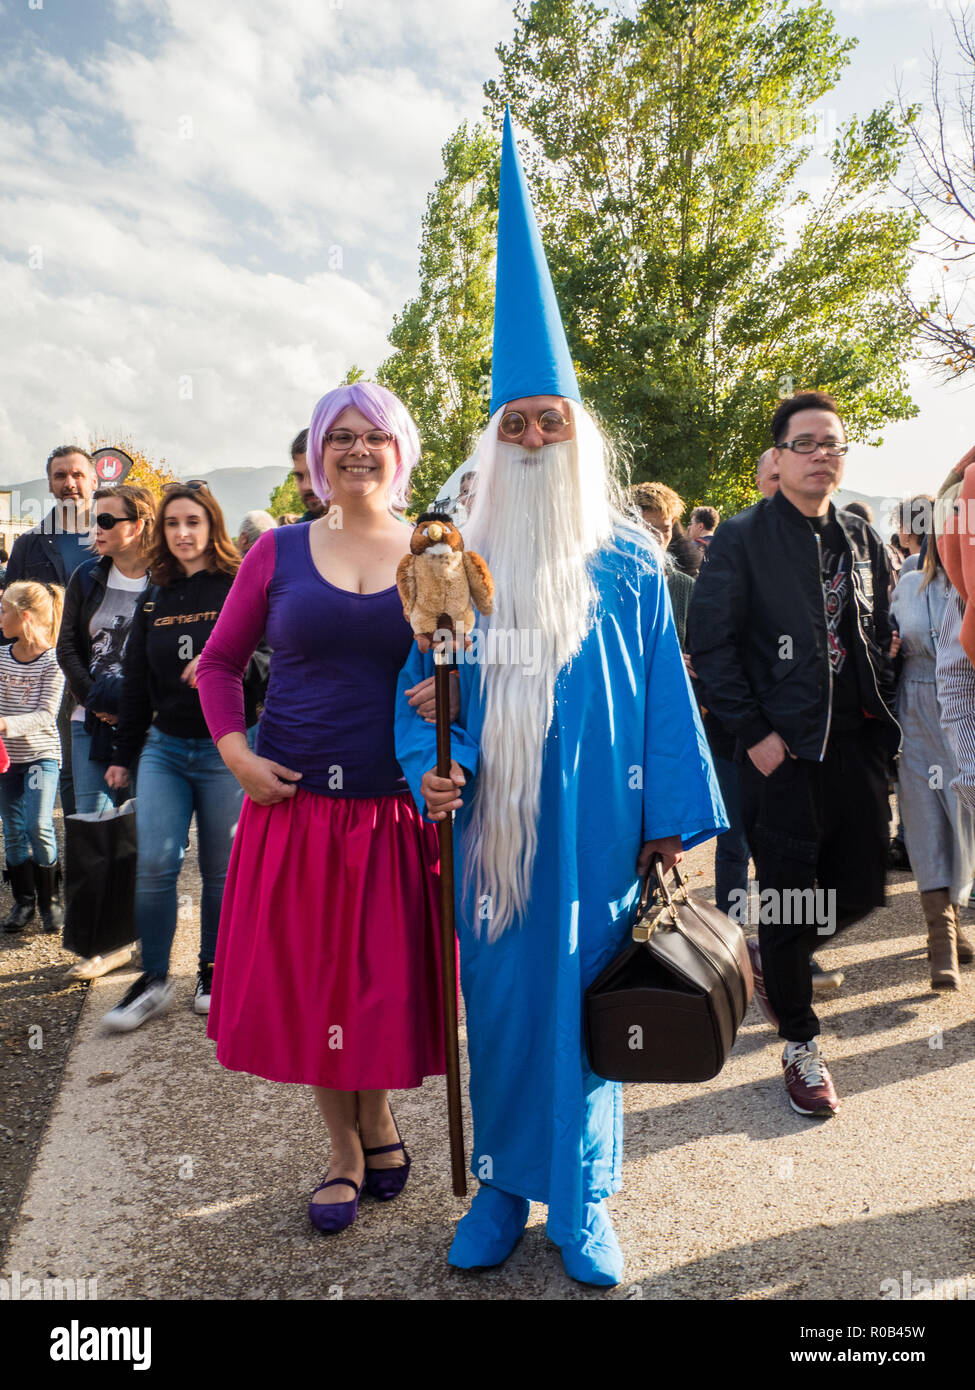 'Wizard' at 'Lucca comics & games', an annual comic book and gaming convention in the walled city of Lucca, Tuscany, Italy Stock Photo